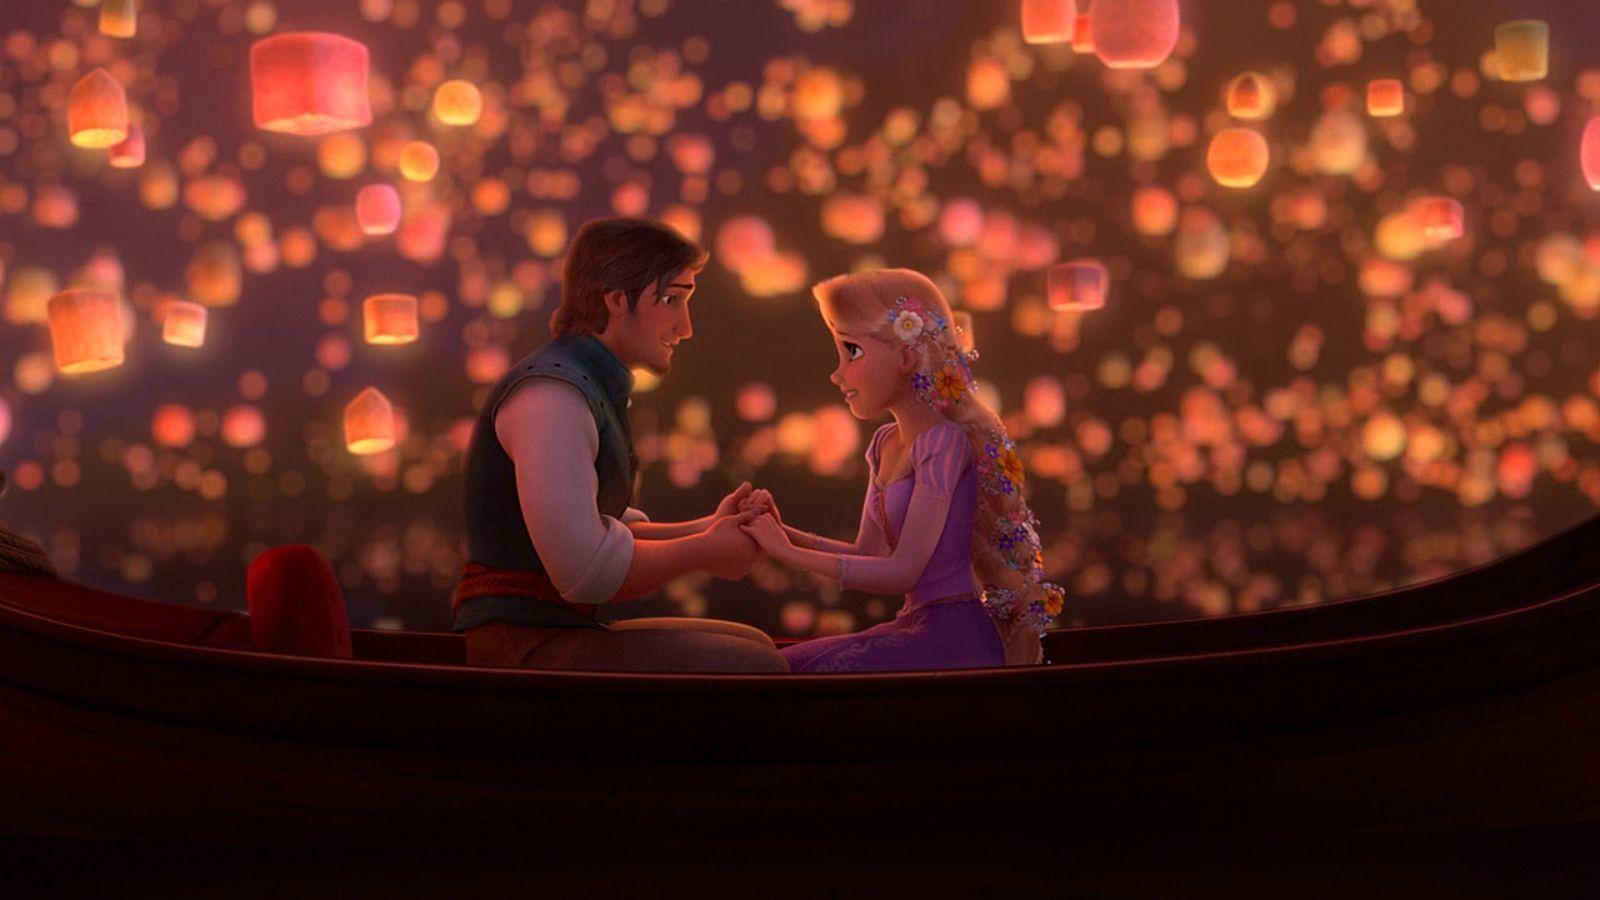 Tangled 4K Wallpapers - Top Free Tangled 4K Backgrounds - WallpaperAccess